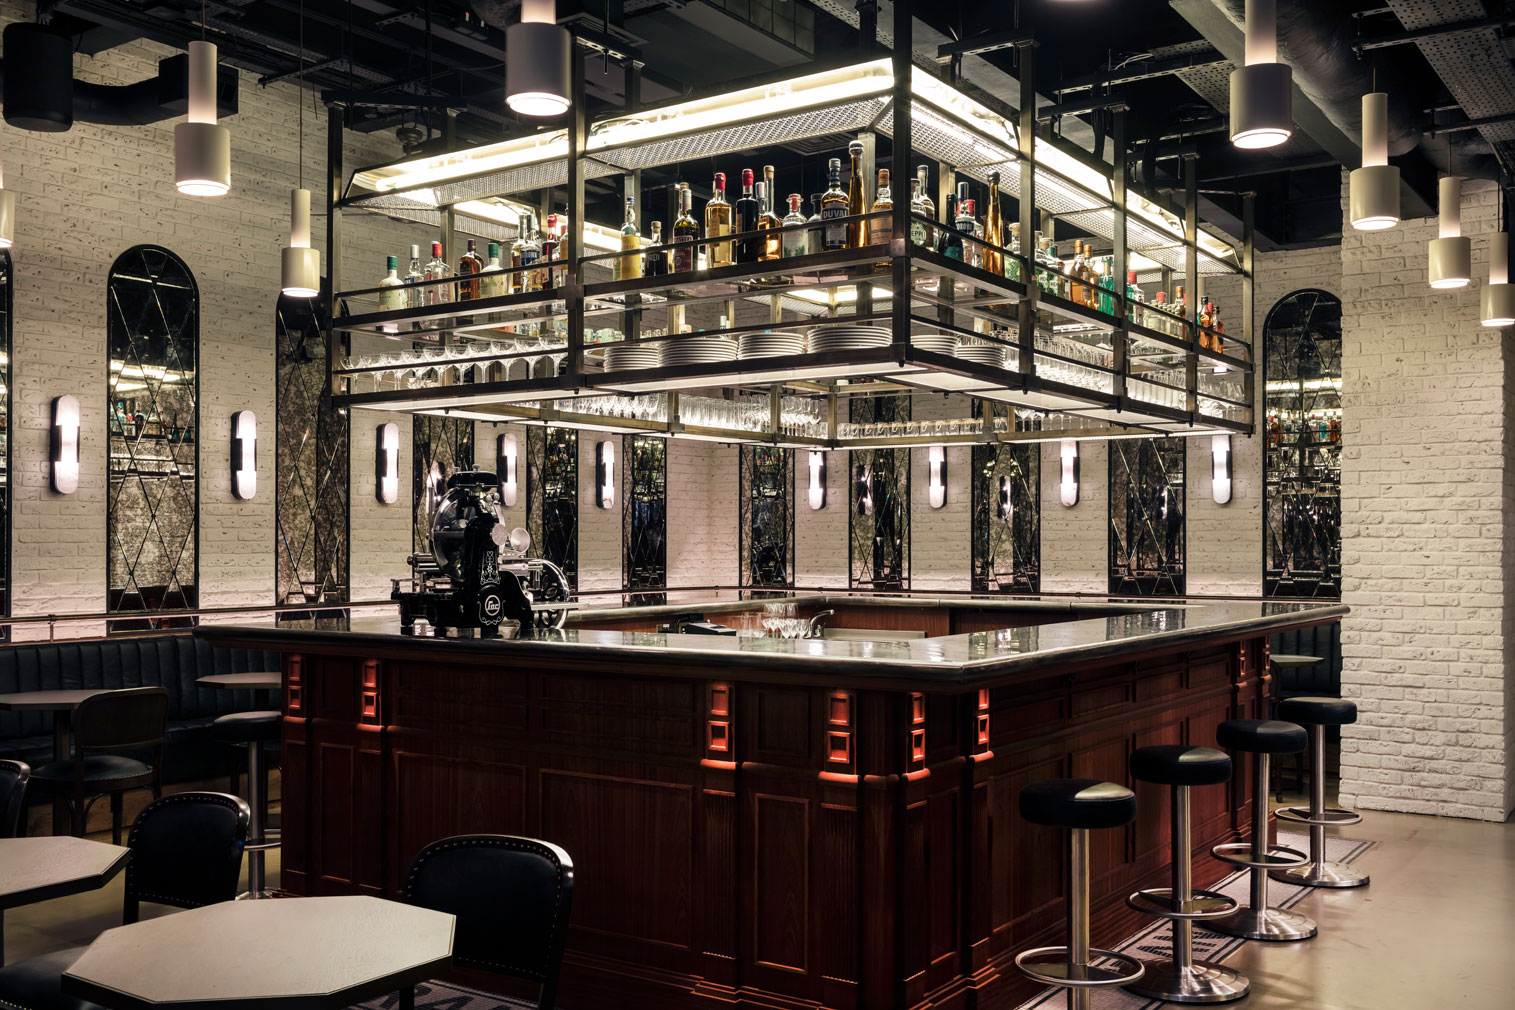 London restaurant Maison Francois puts a postmodern spin on the traditional brasserie